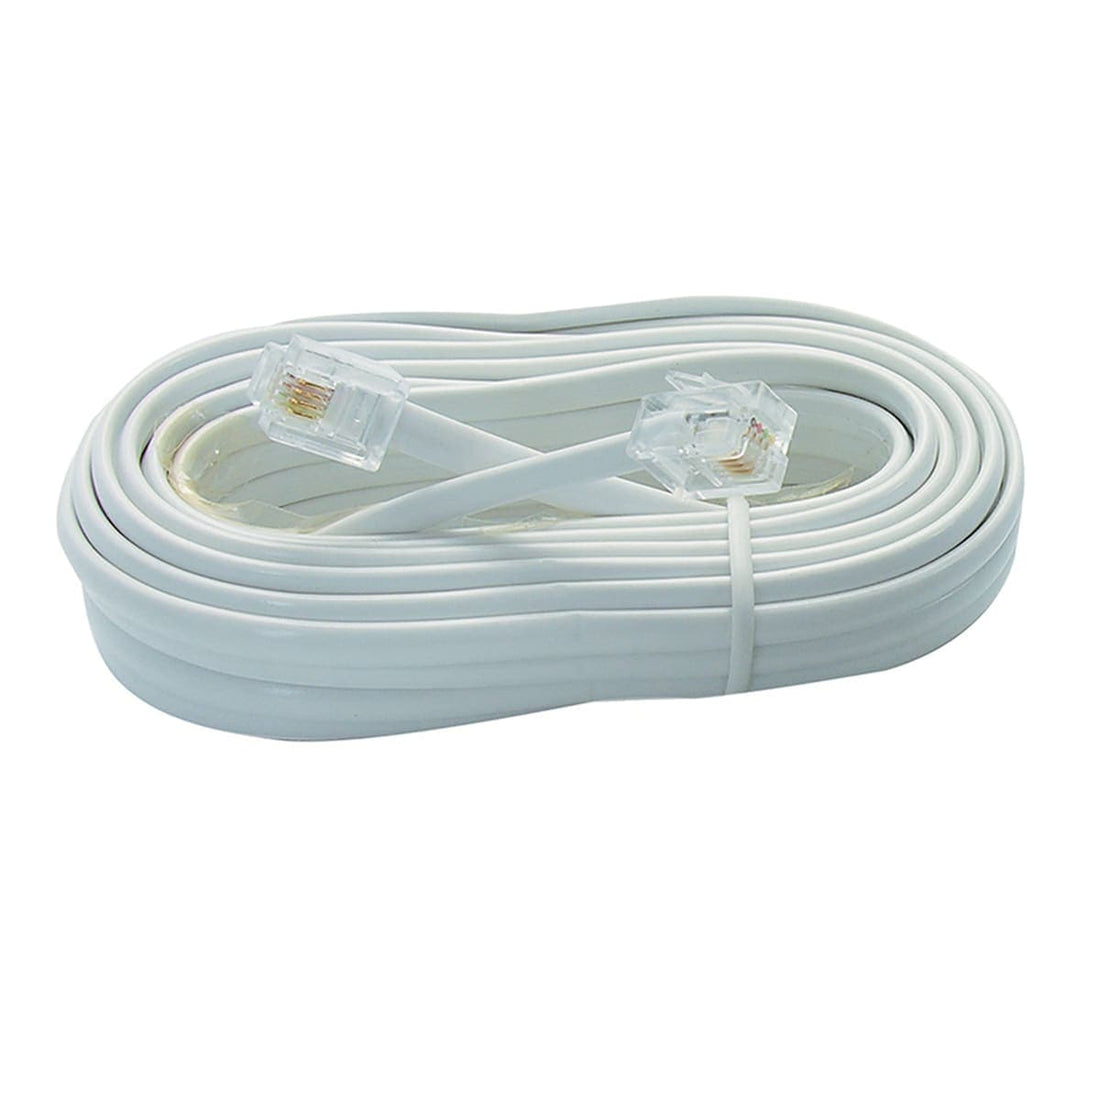 RJ11 MALE/MALE TELEPHONE EXTENSION CABLE 25MT EVOLOGY - best price from Maltashopper.com BR420230964